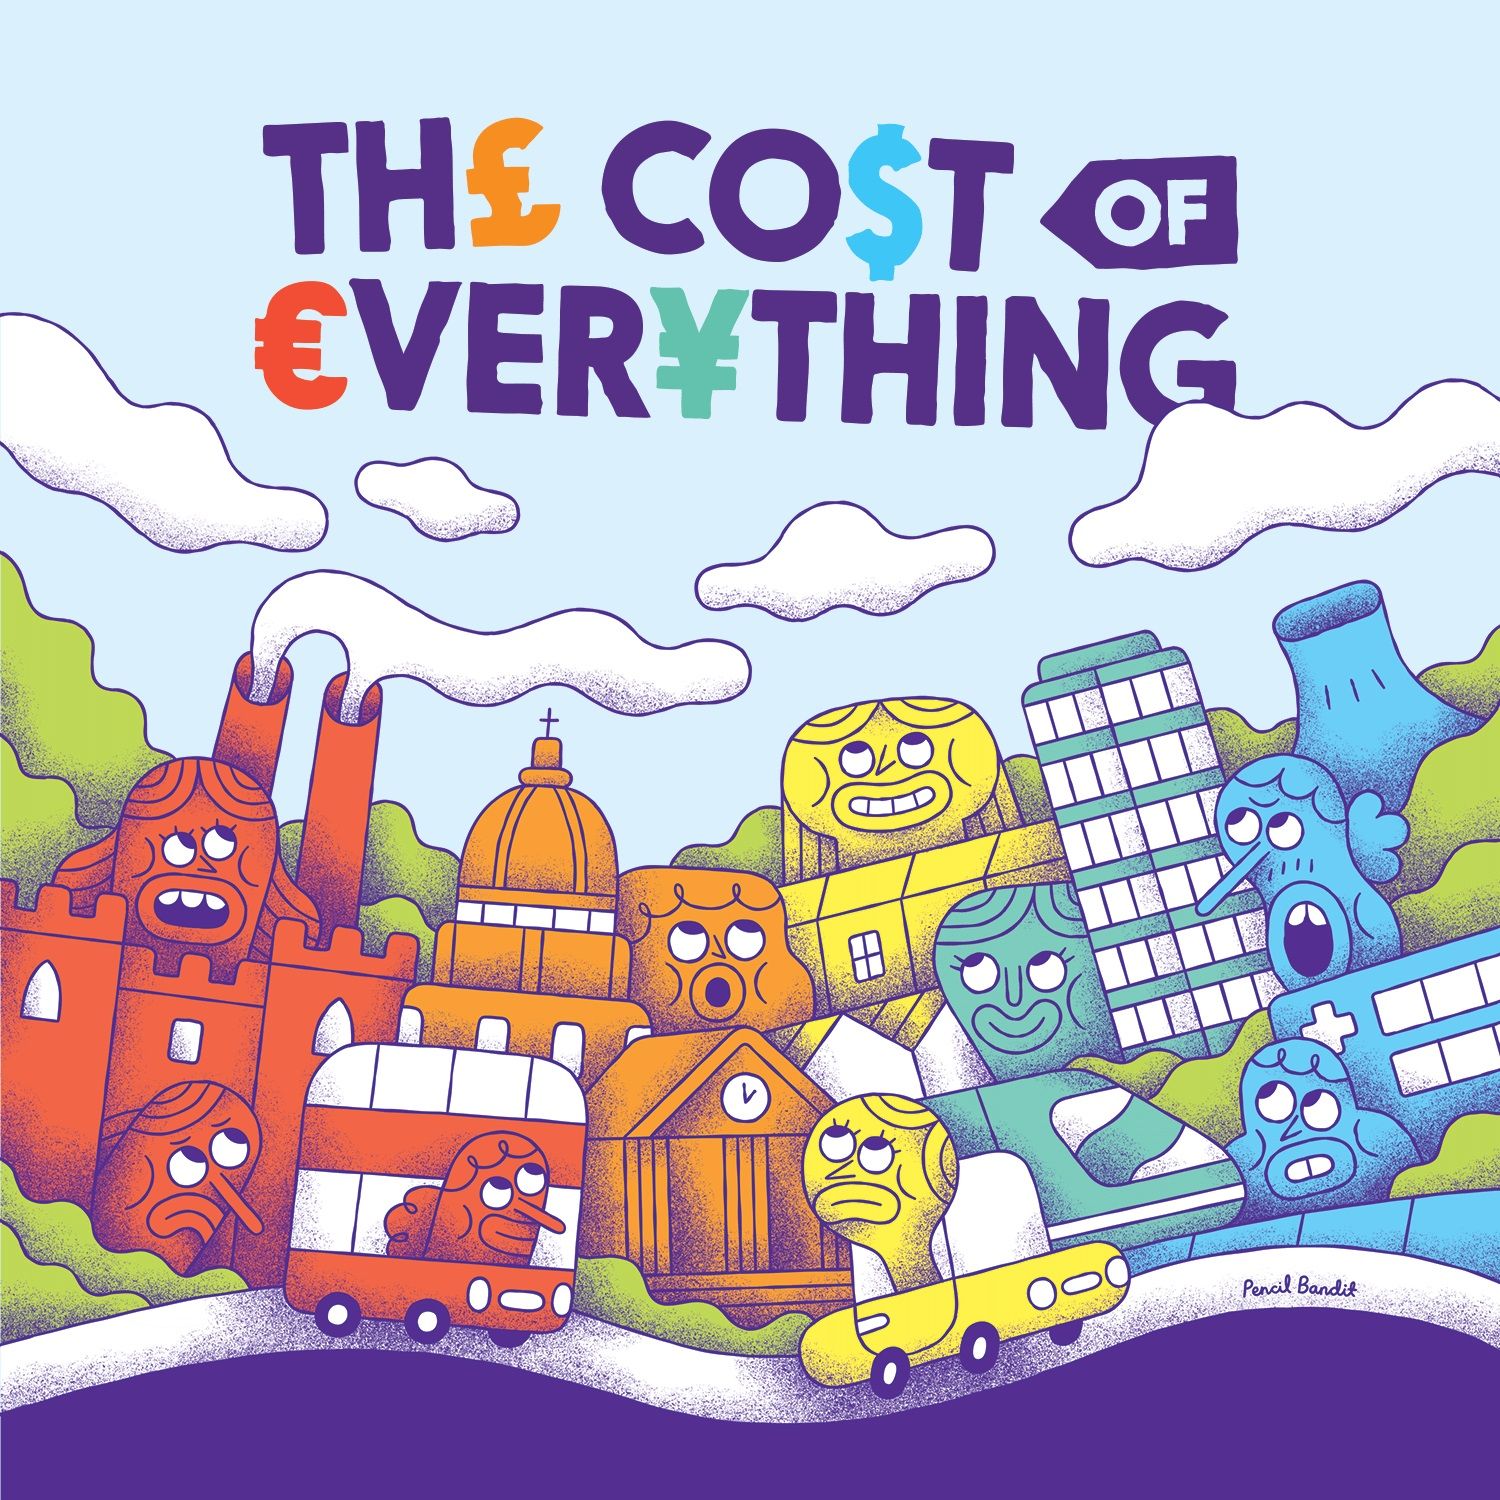 promotional image for The Cost of Everything depicting a cartoon city